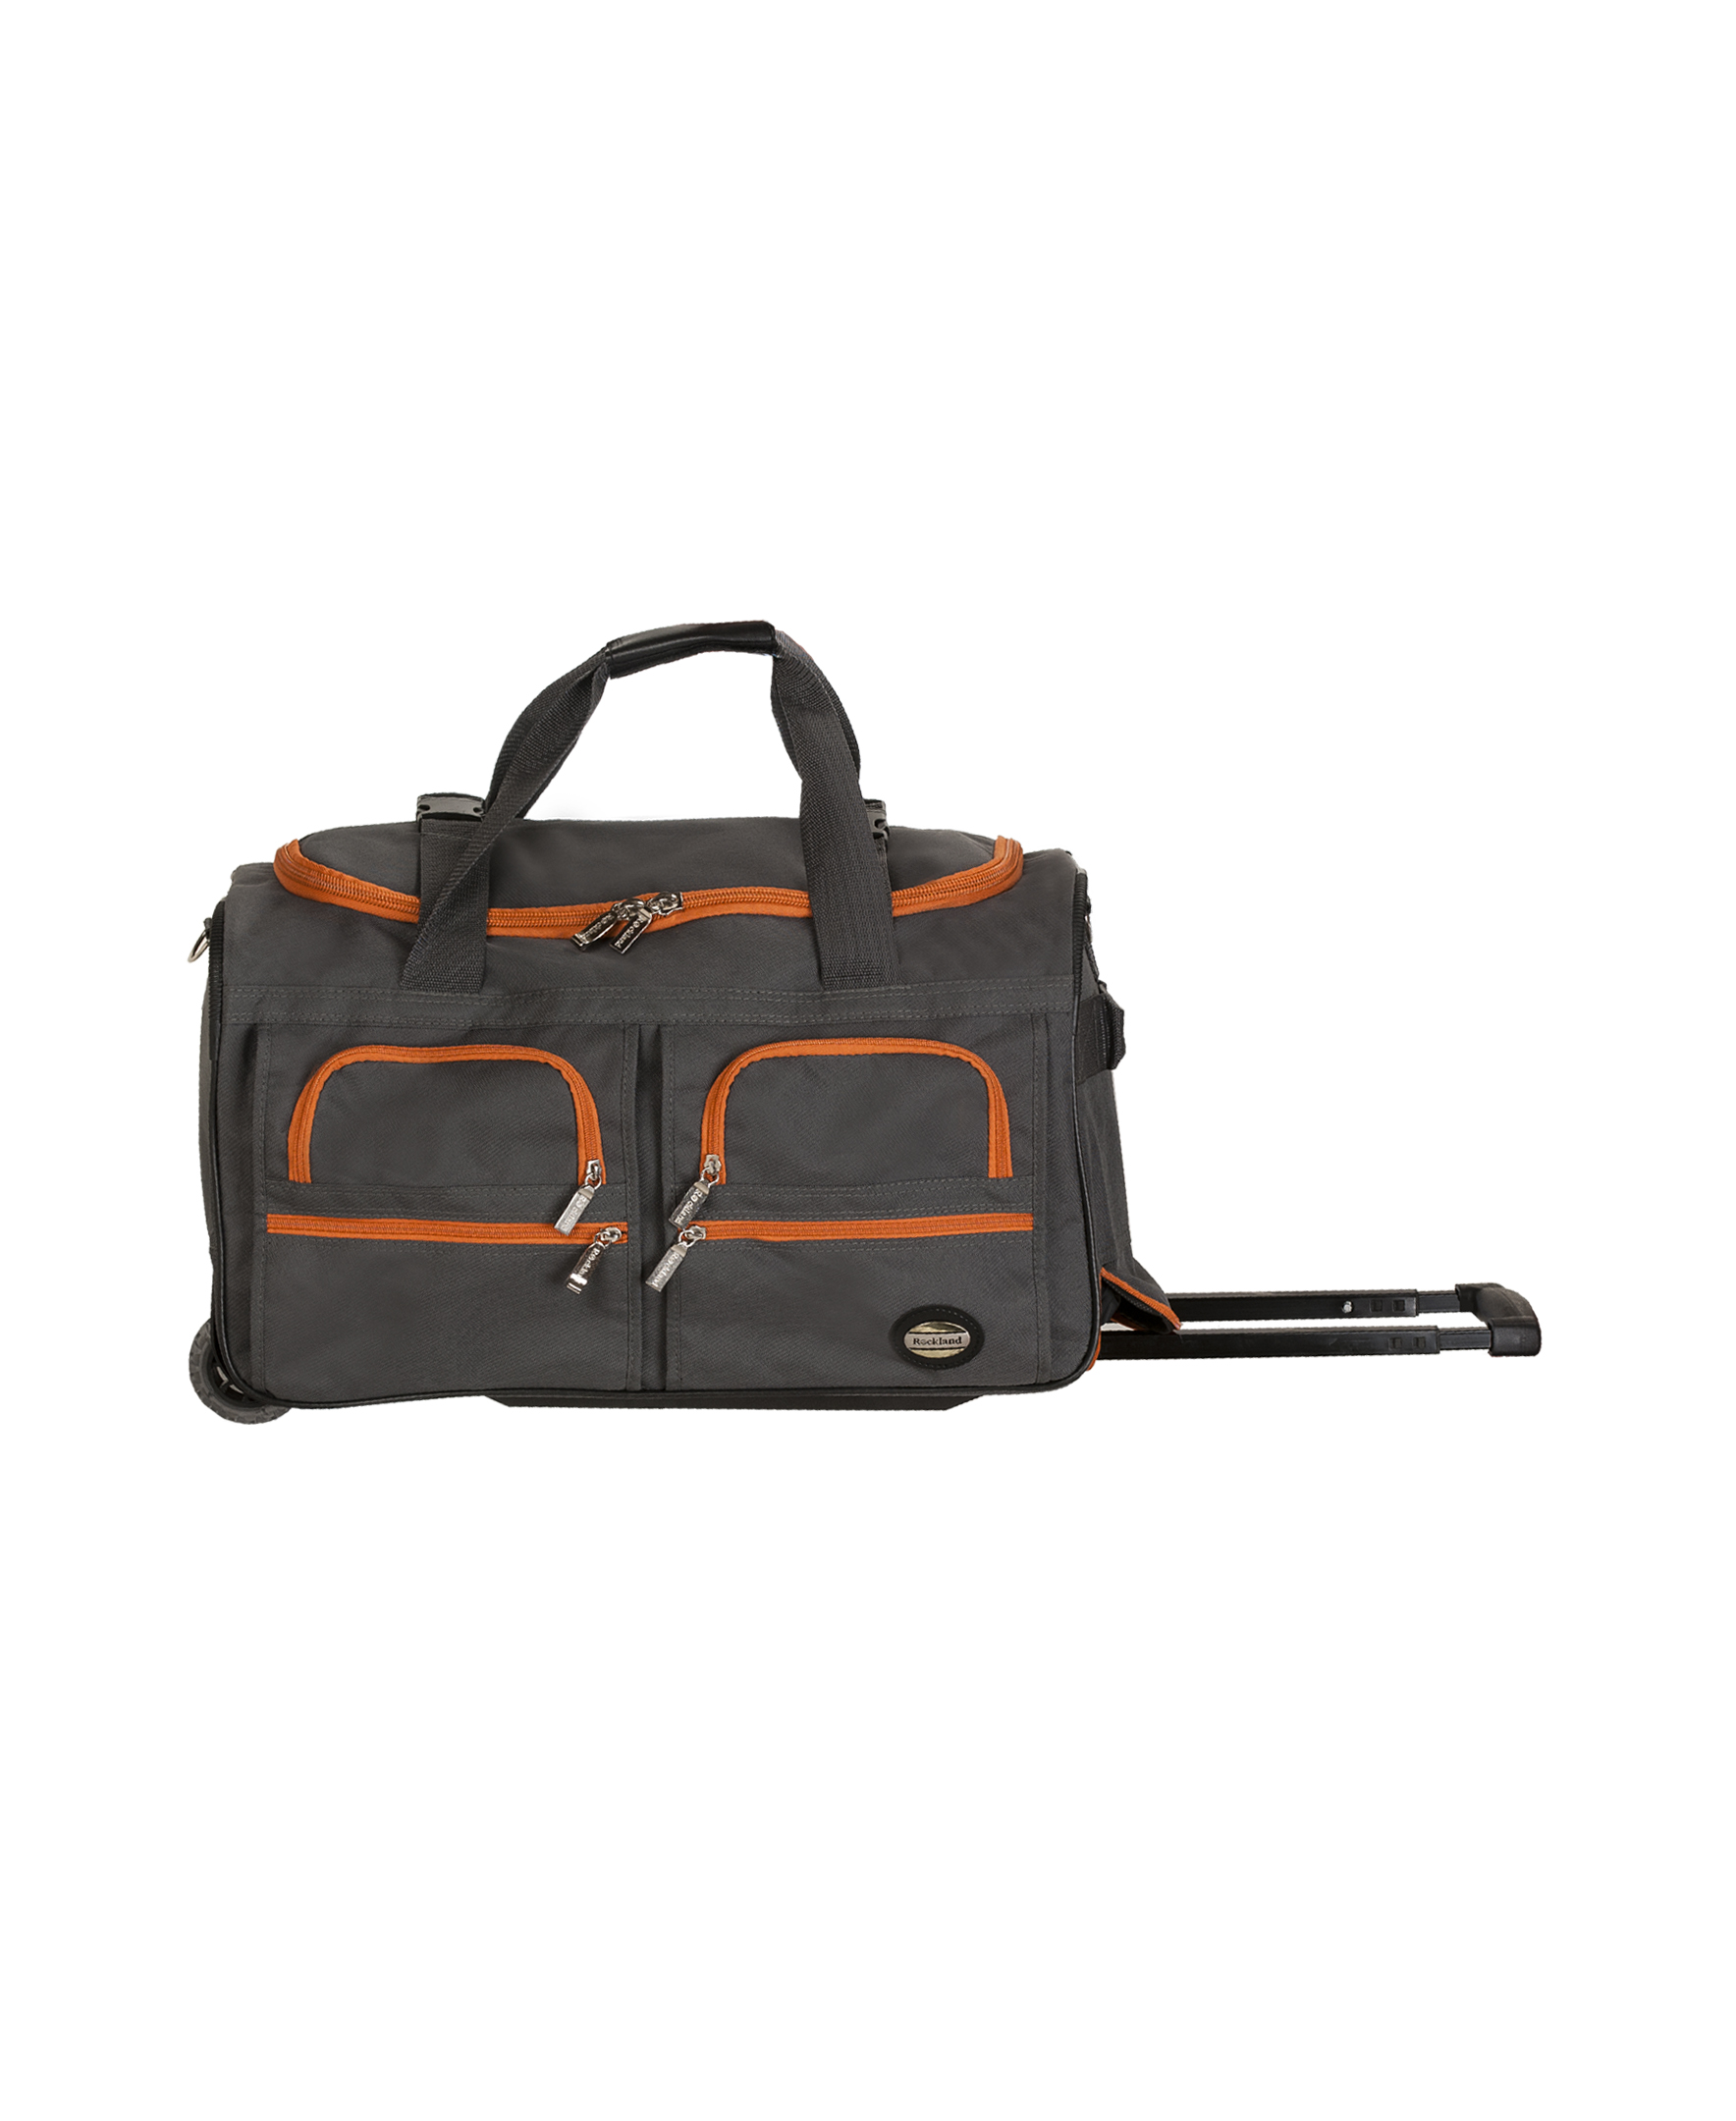 Rockland 22" Rolling Duffle Bag - image 1 of 2